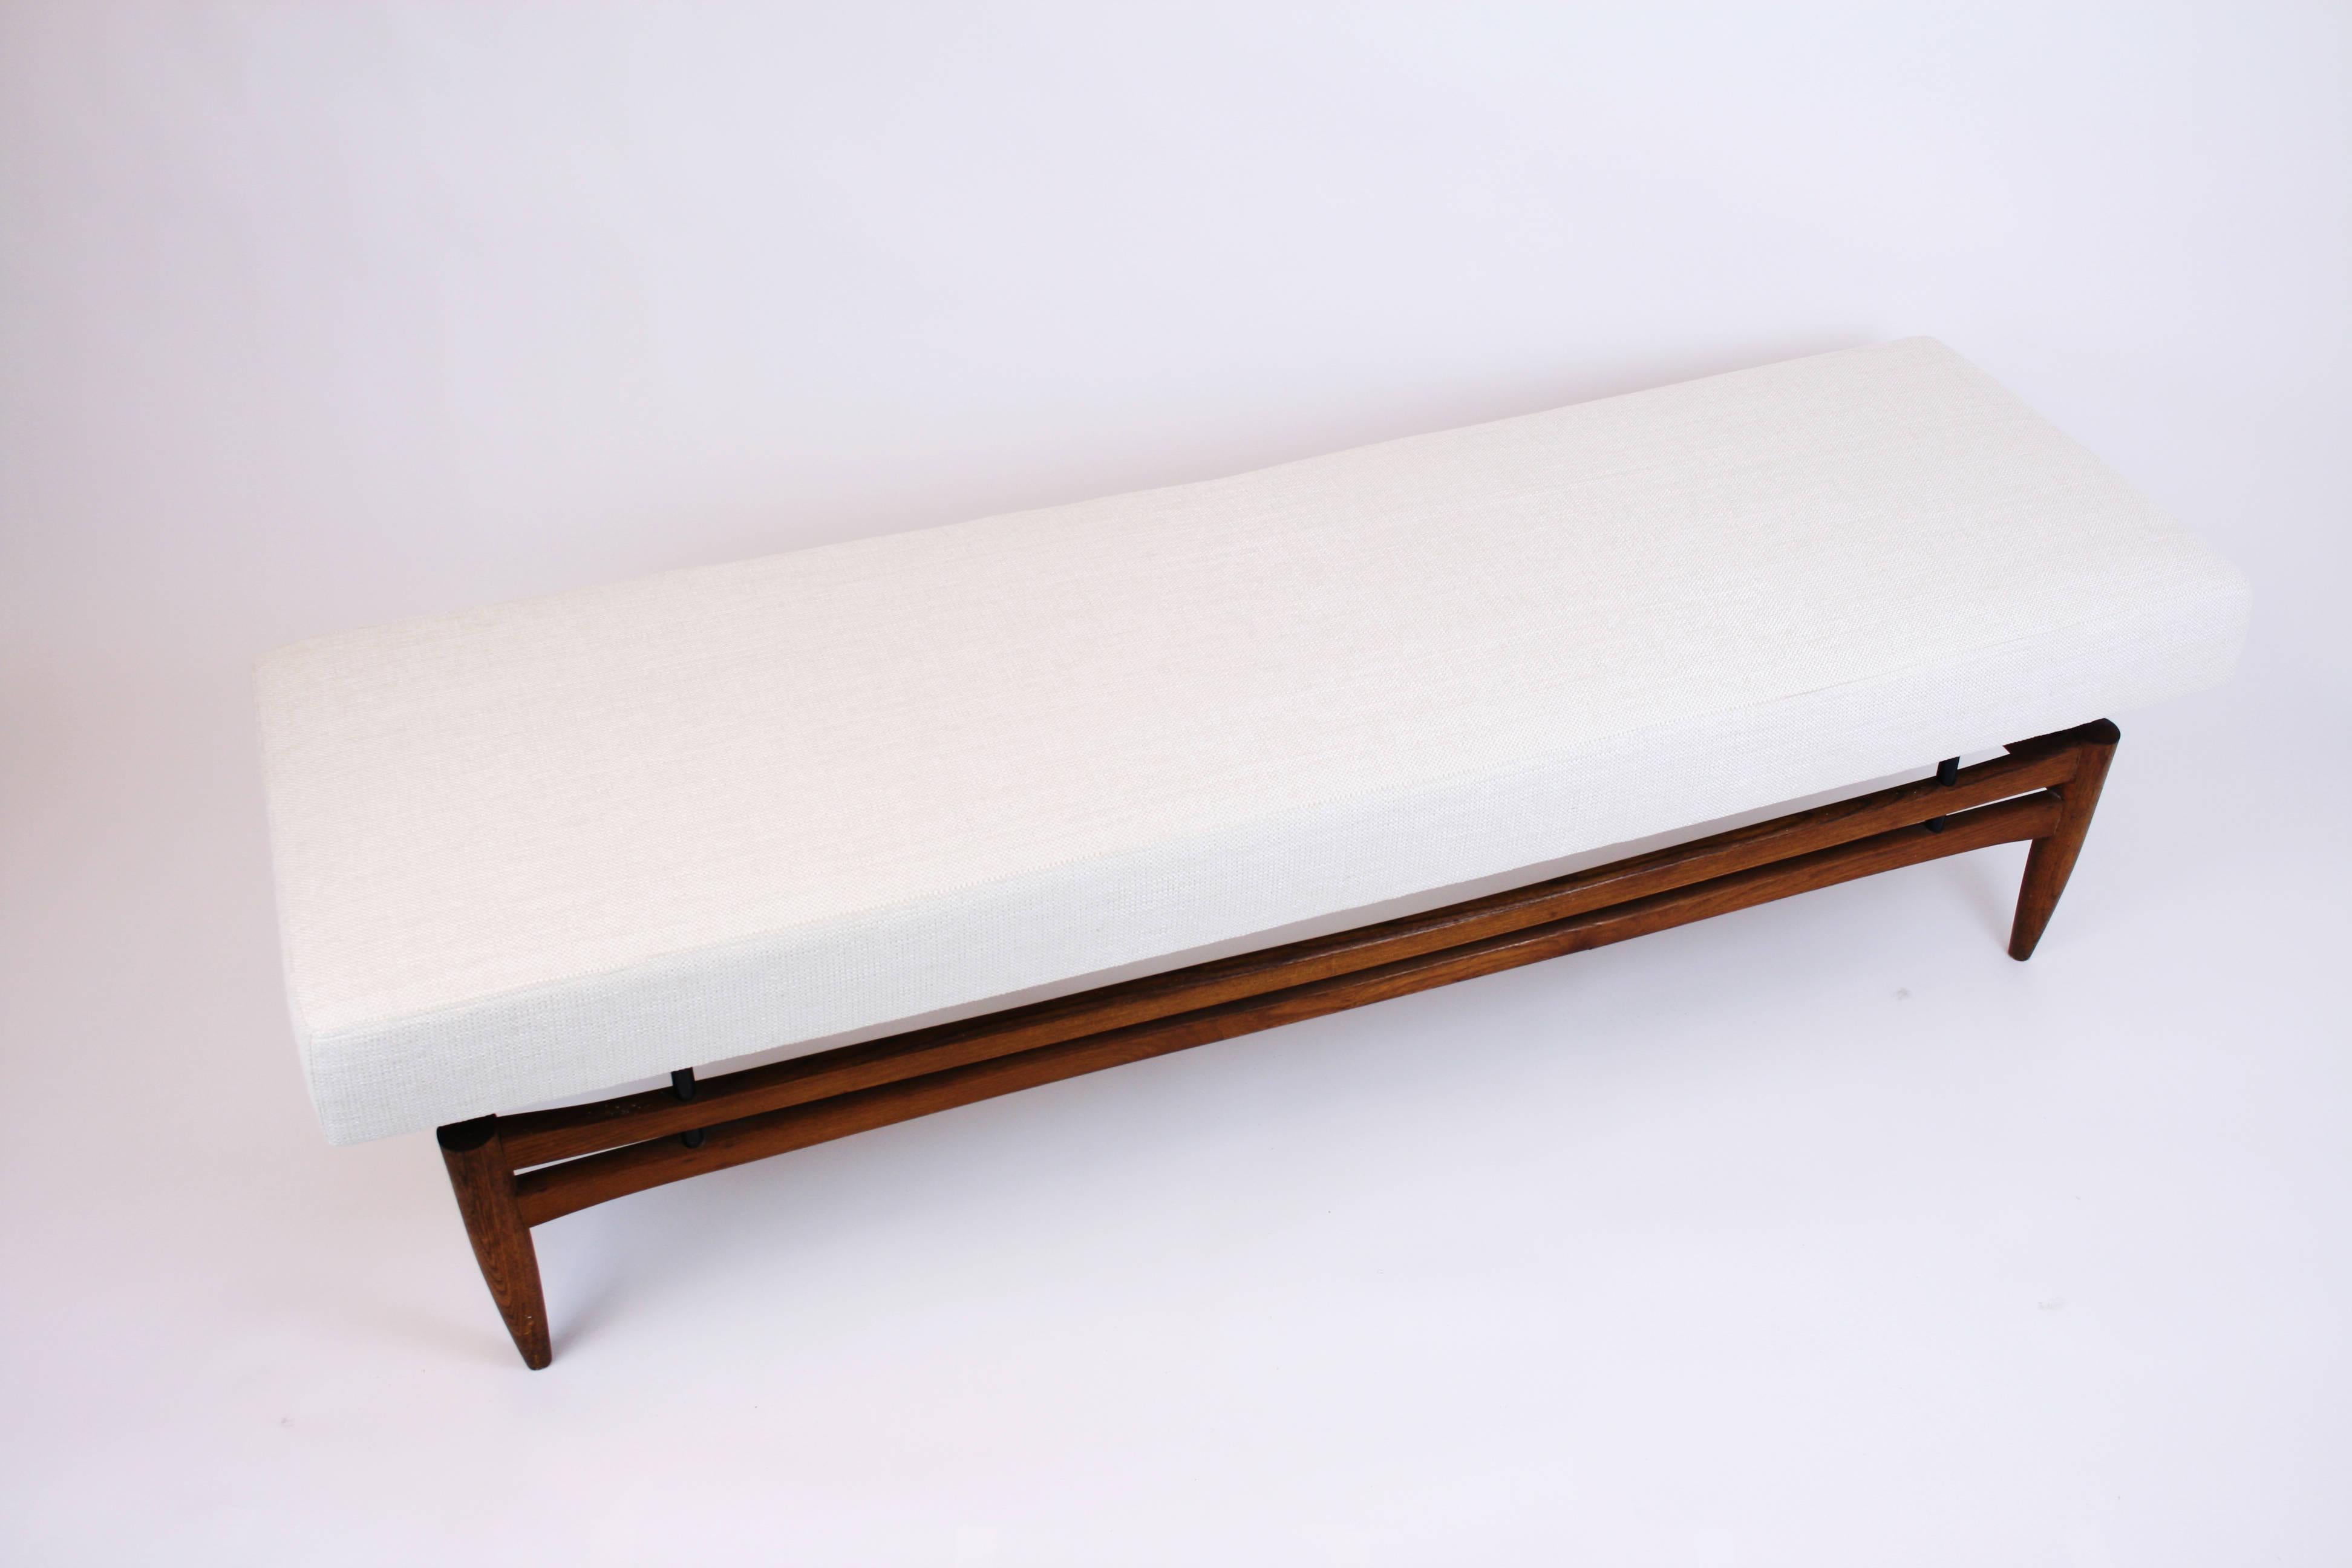 Sofa or setee in the manner of Finn Juhl Danish design teakwood, Denmark, 1960s. Newly upholstered with structured white velor fabric. A very stable piece of furniture that invites you to lie down as well as to sit.